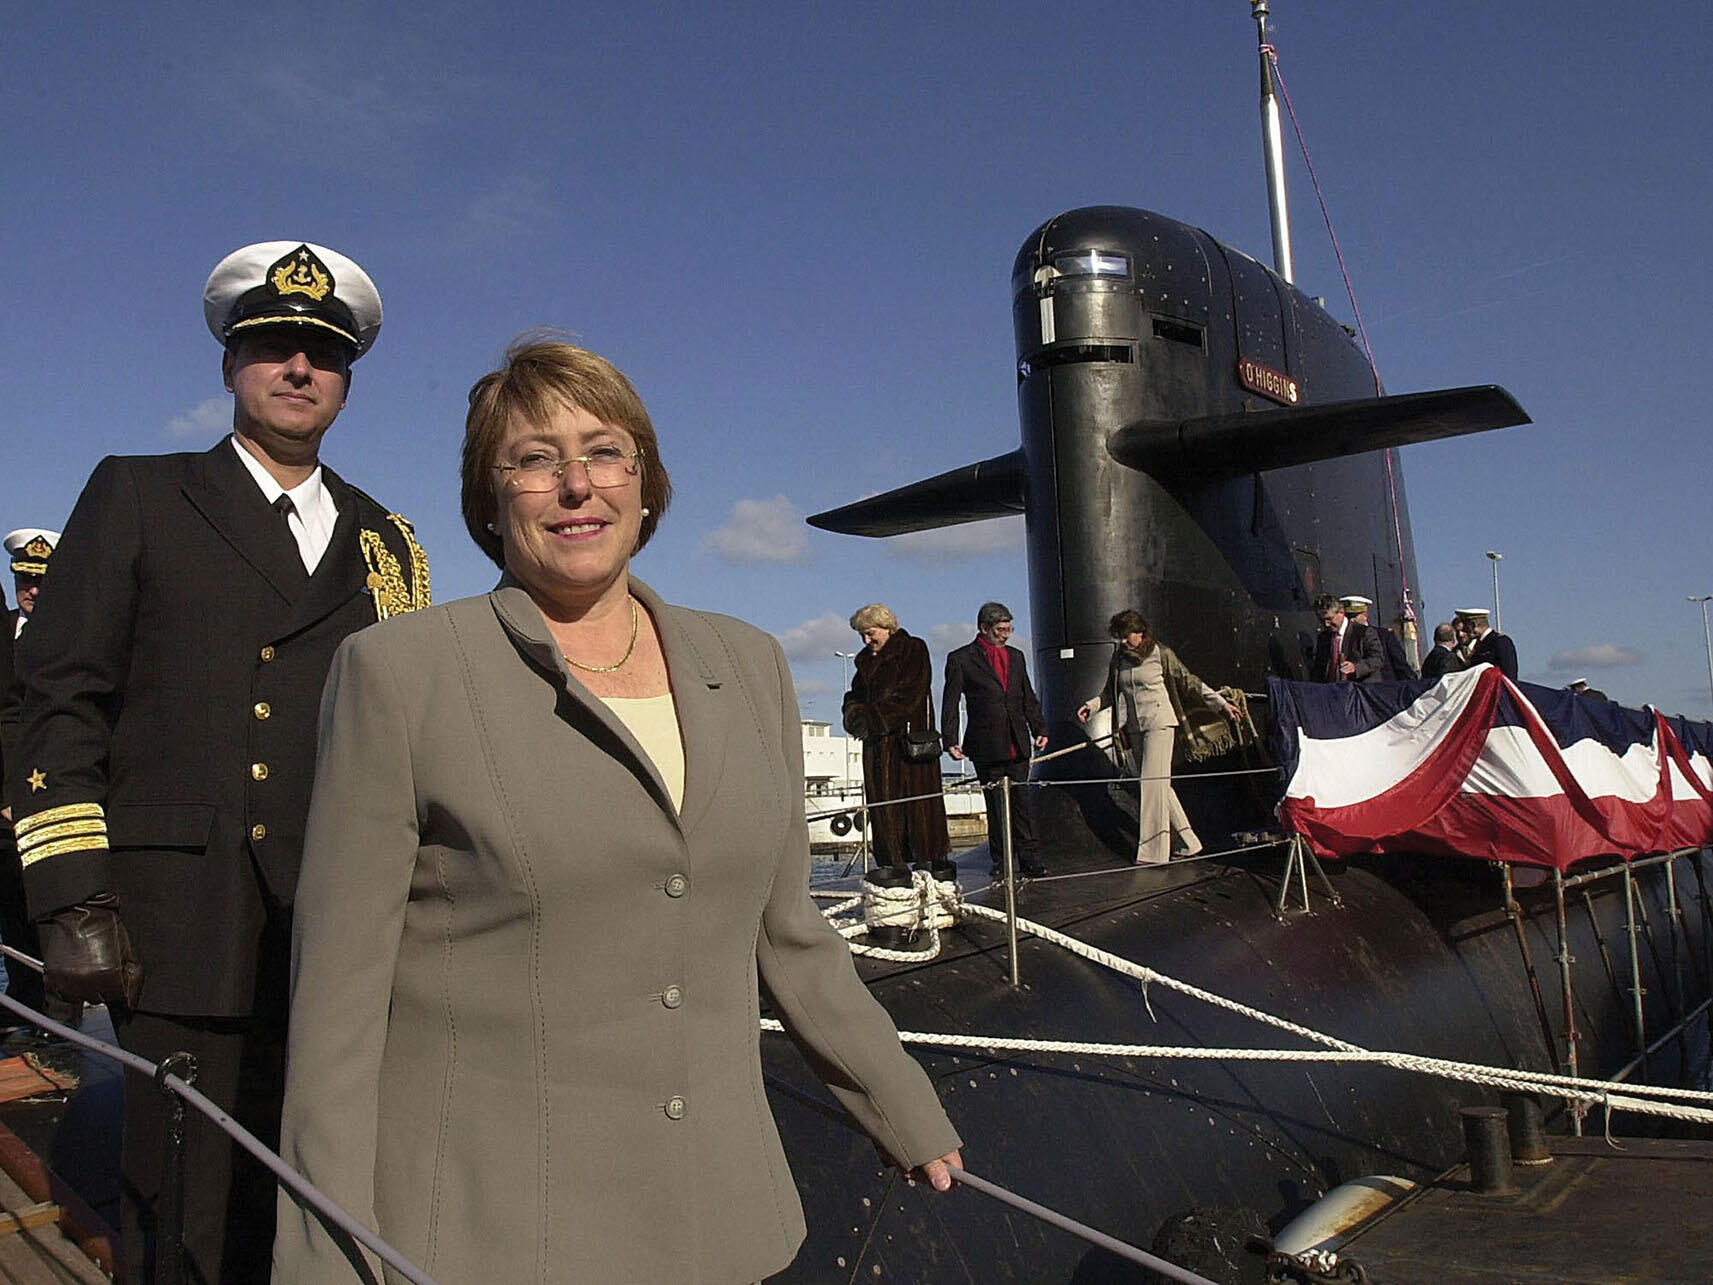 Michelle Bachelet walks down a gangplank after inspecting a submarine as Chile’s Defense Minister, 2003. (Photo by Mychele Daniau/Getty Images.)